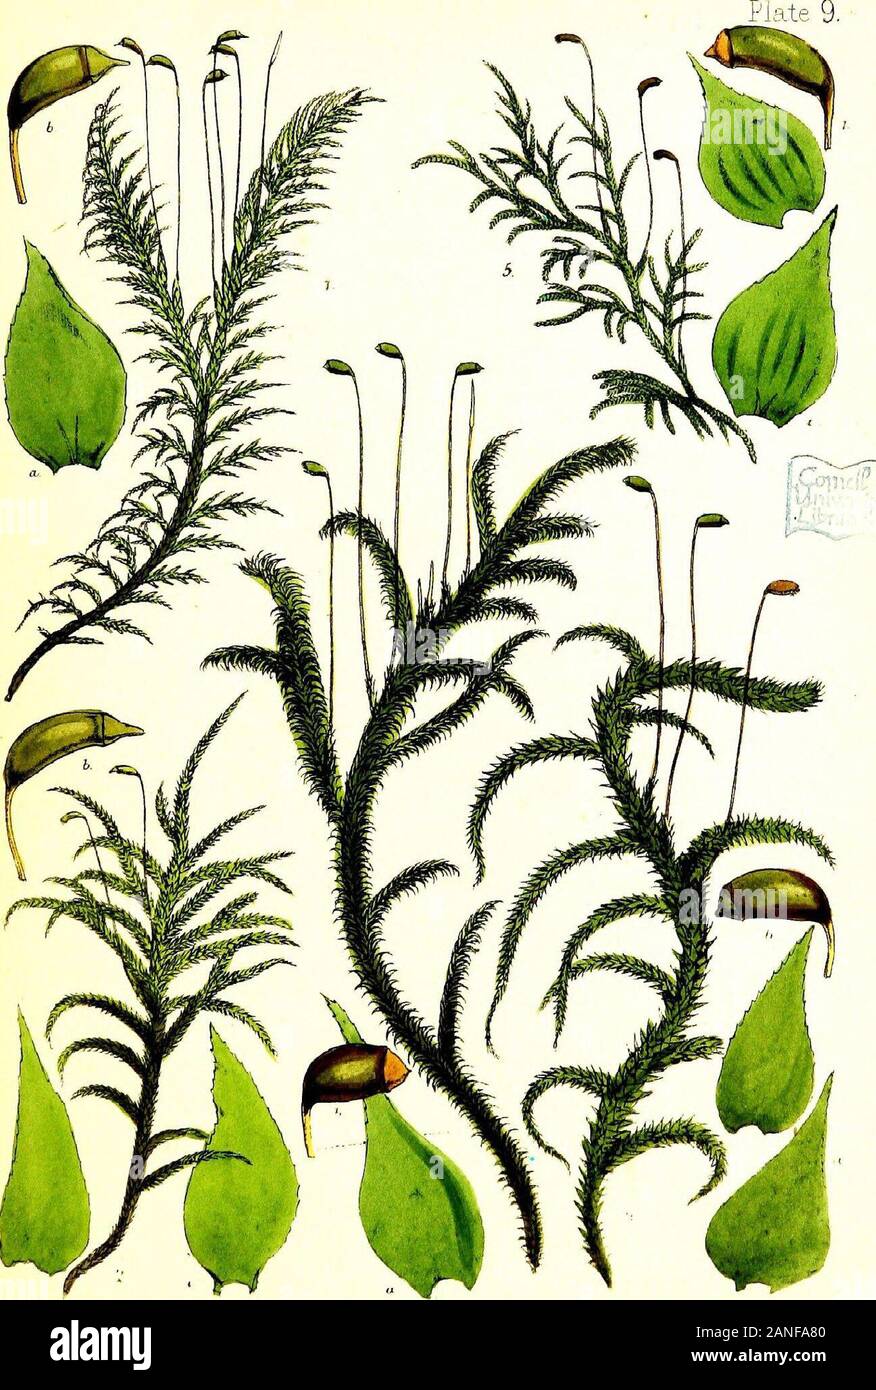 Handbook of British mosses; comprising all that are known to be natives of the British Isles . W raid,,dei et lit Vincent Broolra, Imp PLATE IX. 1. Hypnum splendens. a. leaf, magnified. 6. sporangium, magnified. 2. H. brevirostre. a. leaves, from before and behind, magnified. b. sporangium, magnified. 3. H. triquetrum. a. leaves, magnified. b. sporangium, magnified. 4. H. loreum. a. leaves, magnified. b. sporangium, magnified. 5. H. flagellare. a. leaves, magnified. b. sporangium, magnified.. Writari.da »r- -t PLATE X. 1. Hypnum squarrosum (a procumbent form). a. leaf from behind, magnified. b Stock Photo